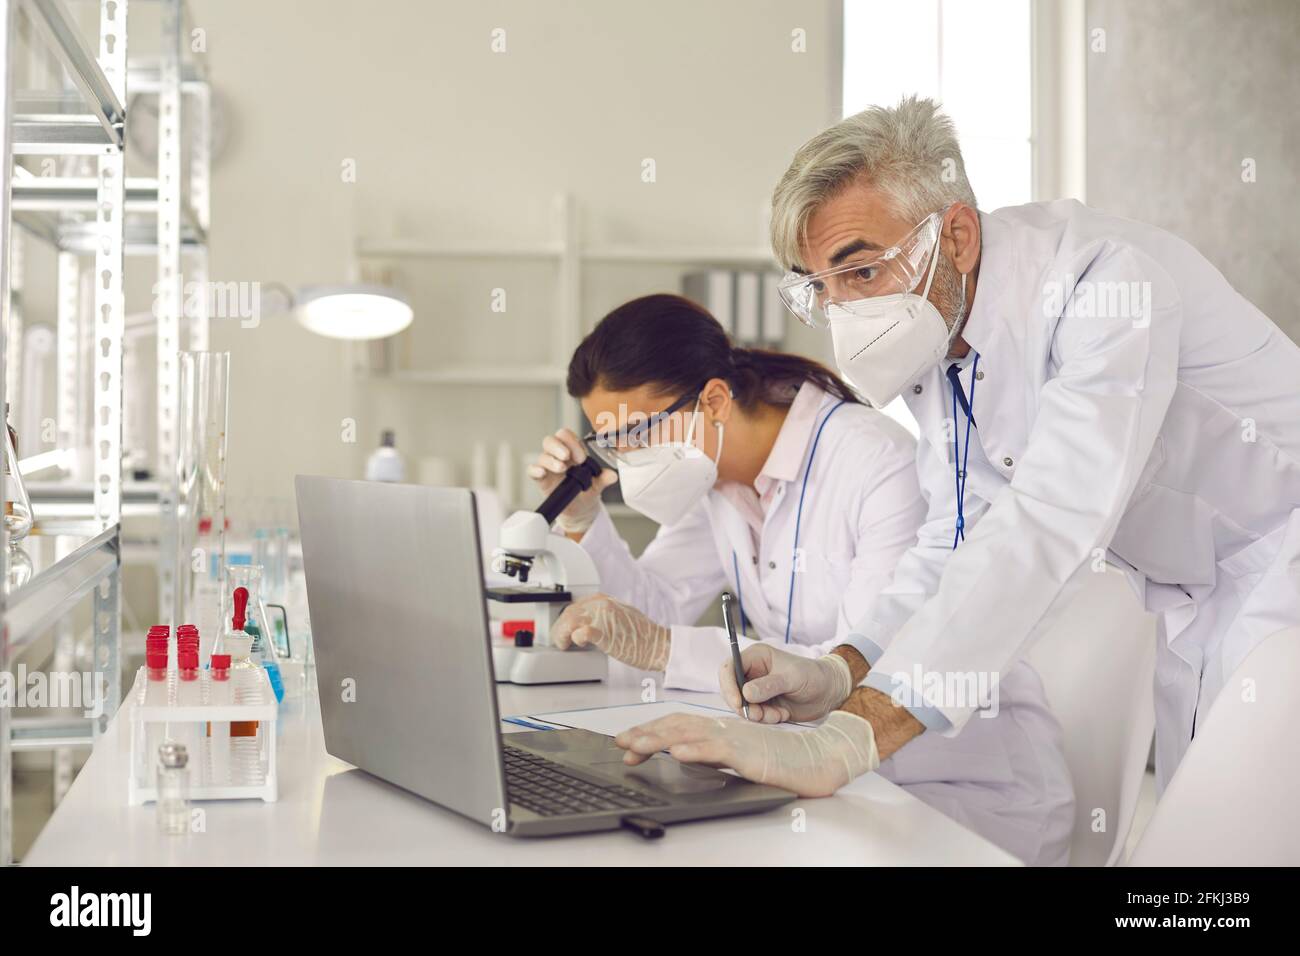 Microbiologist biotechnology researcher in facial mask conducting experiment Stock Photo